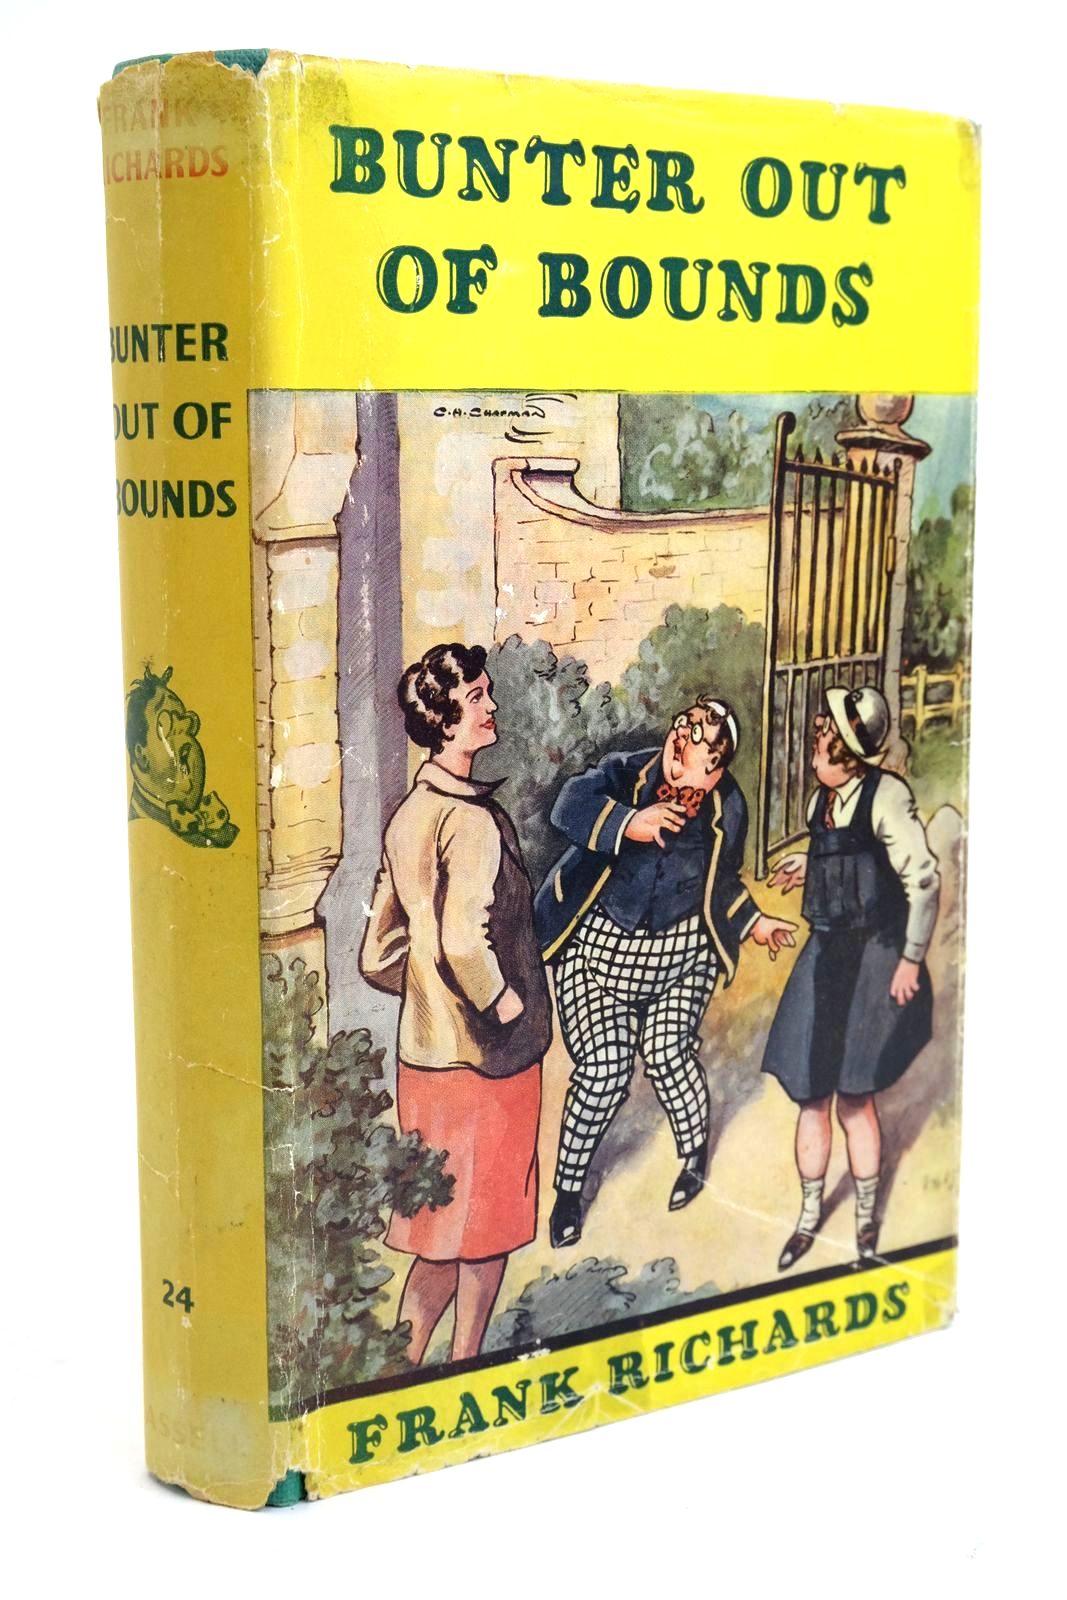 Photo of BUNTER OUT OF BOUNDS written by Richards, Frank illustrated by Chapman, C.H. published by Cassell (STOCK CODE: 1321899)  for sale by Stella & Rose's Books